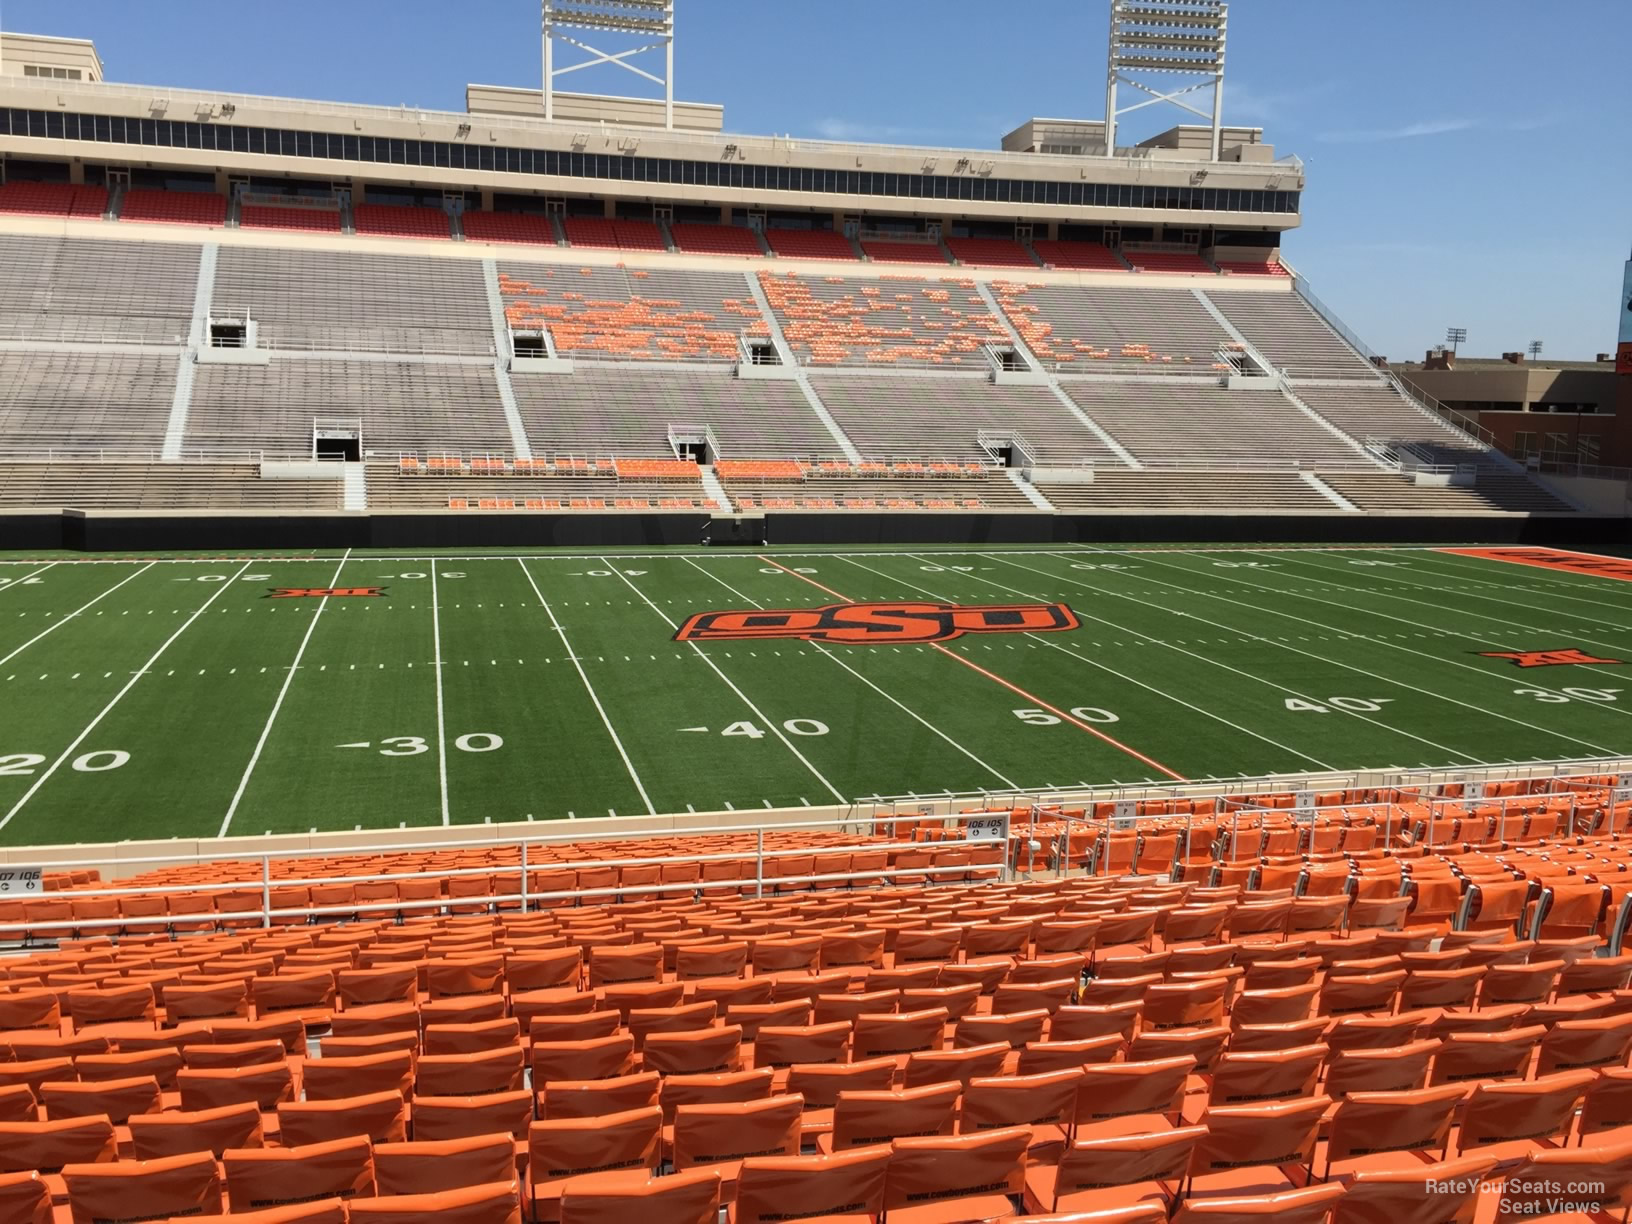 section 207, row 20 seat view  - boone pickens stadium